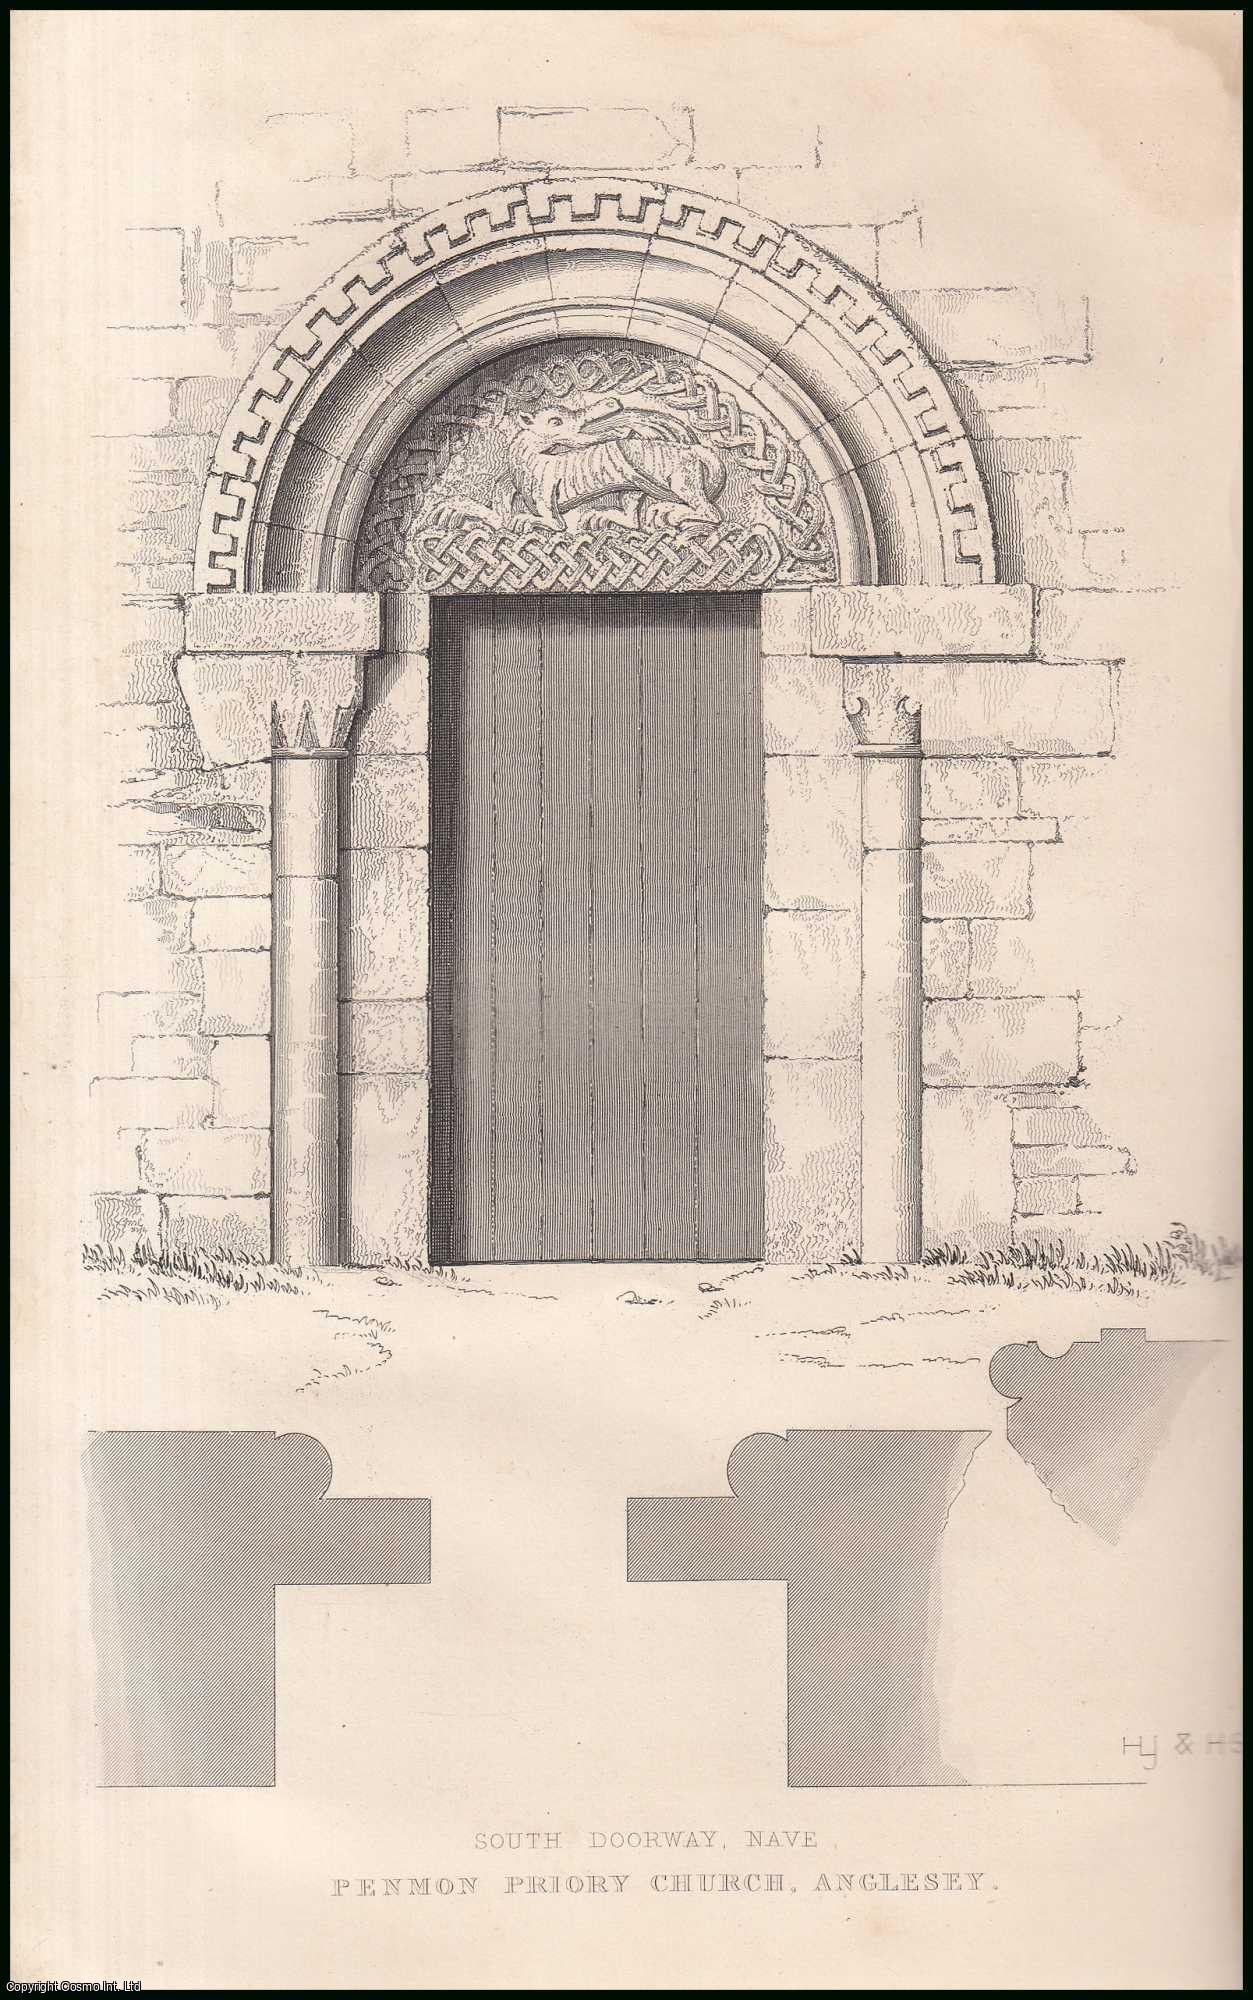 H.L.J. - Penmon Priory Church, Anglesey. An original article from the Archaeologia Cambrensis, a Record of The Antiquities of Wales & its Marches, 1849.